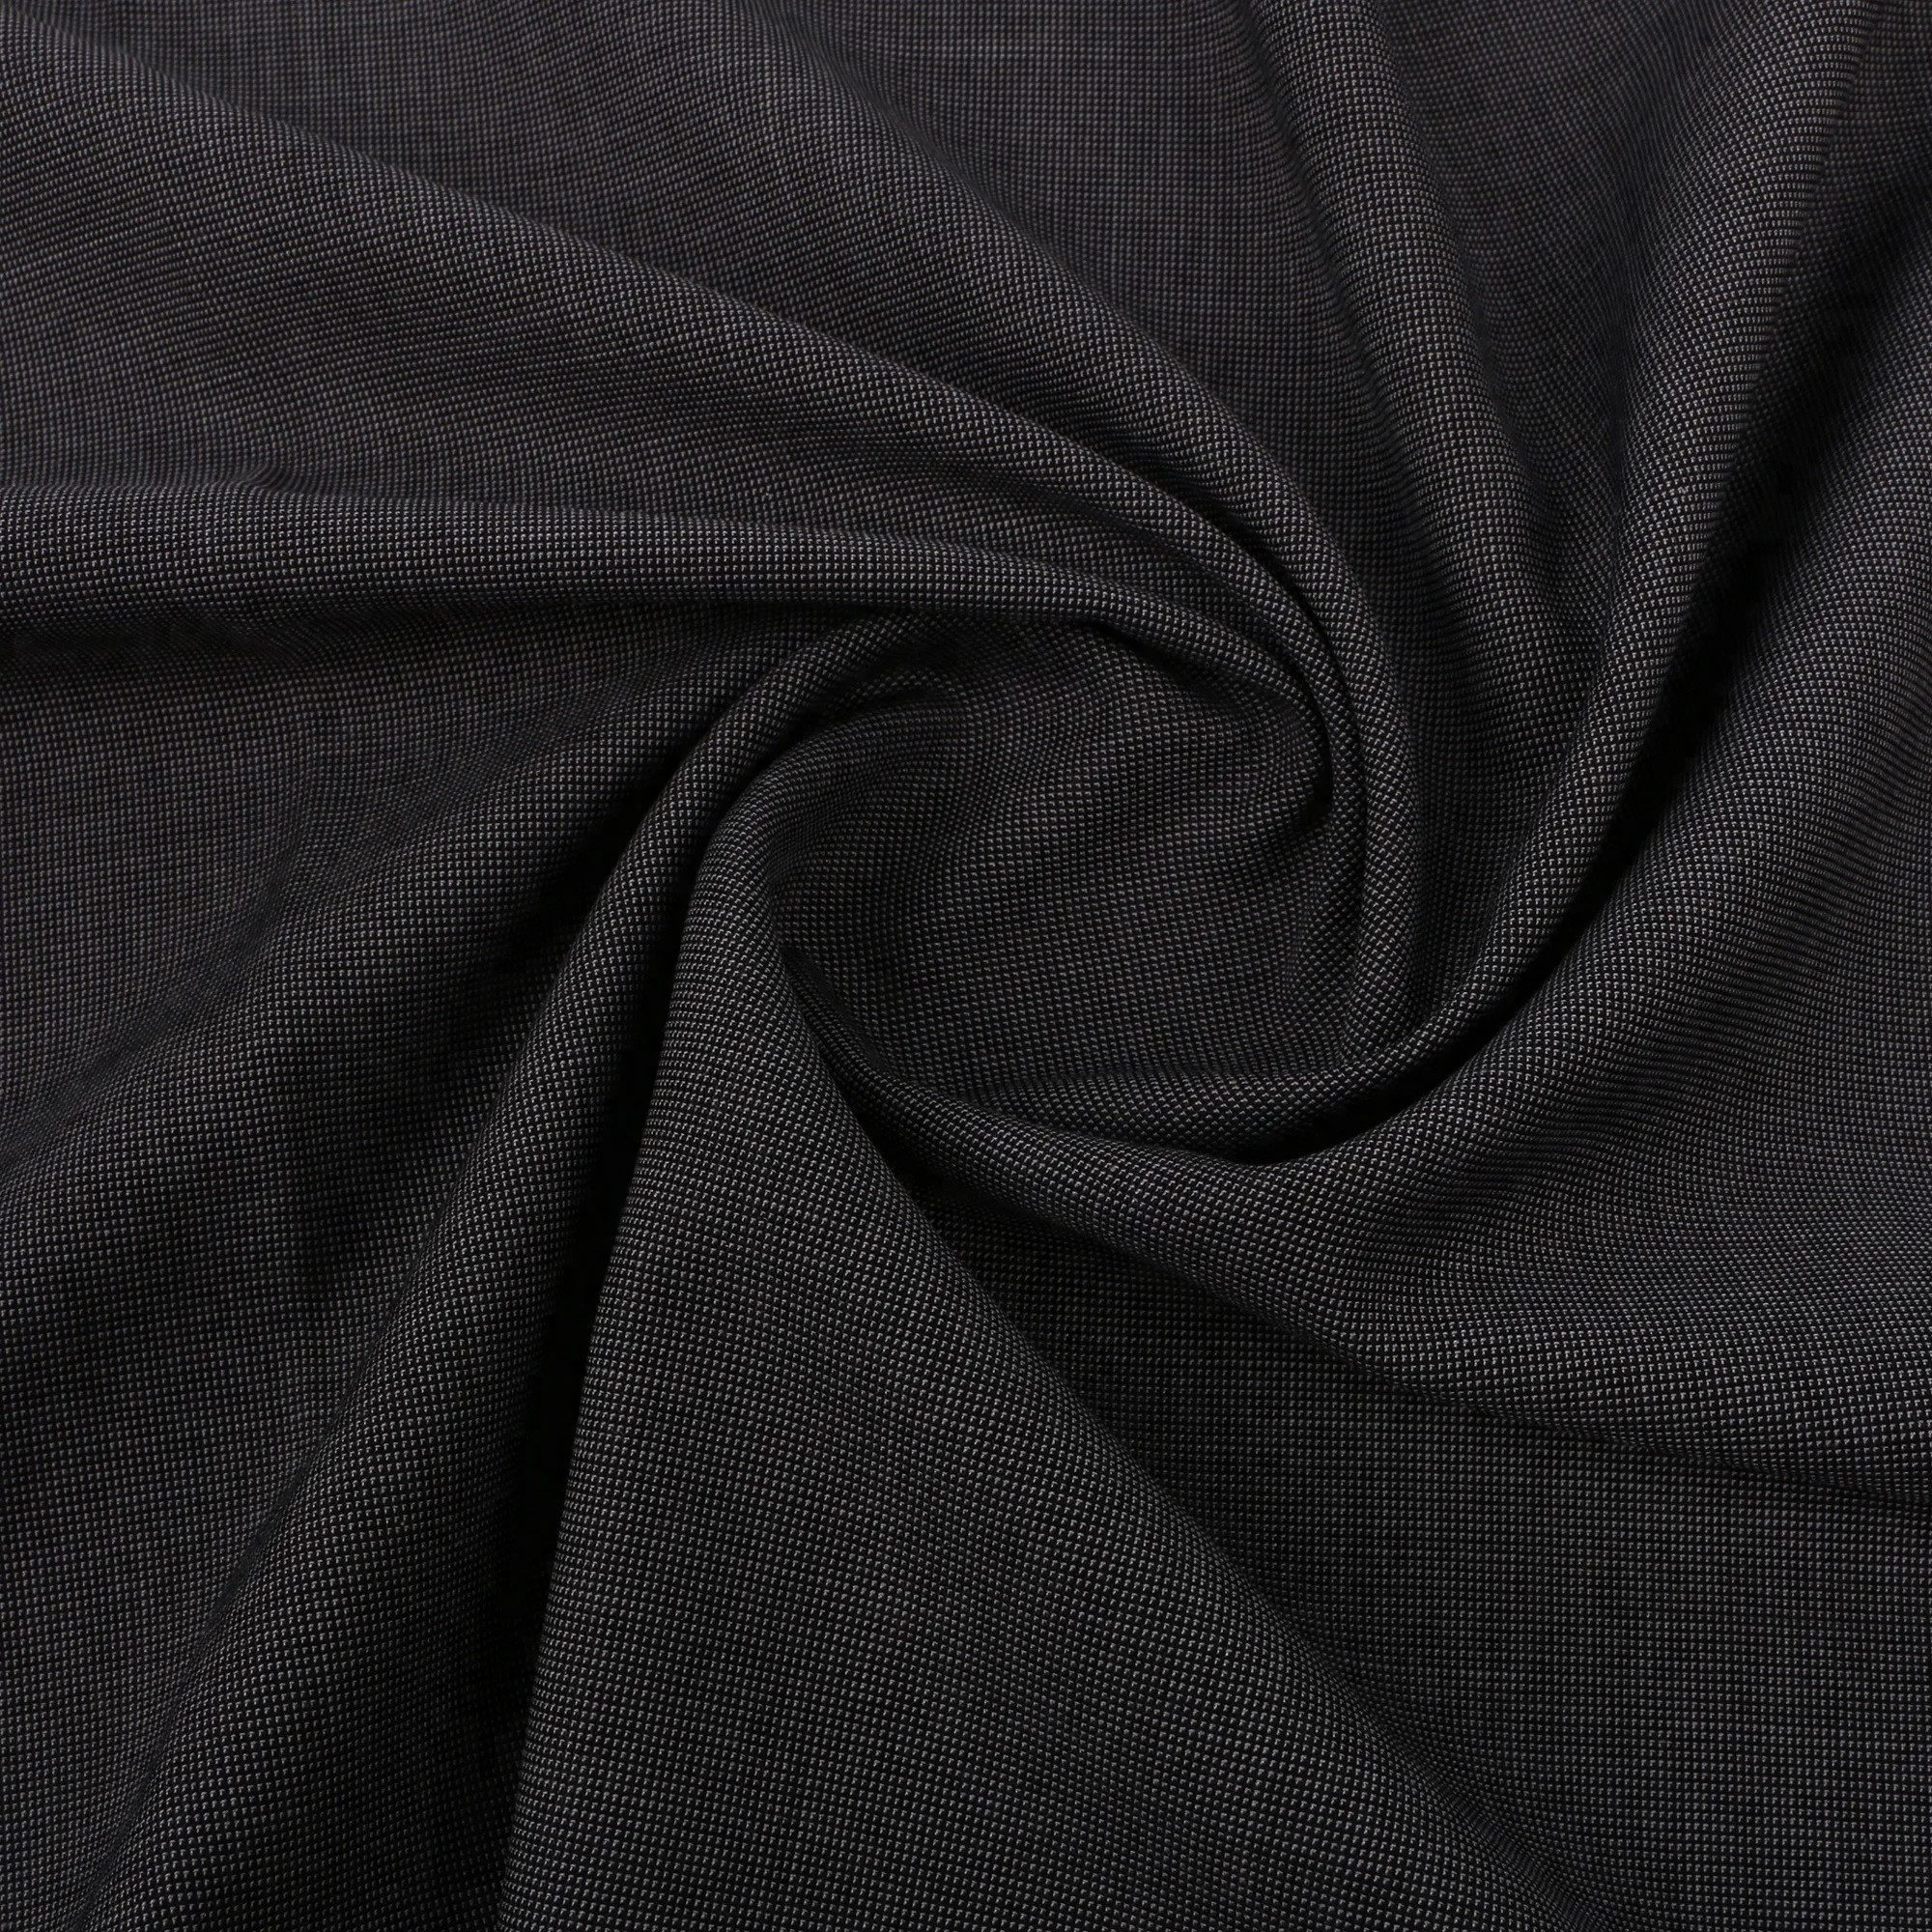 Polyester Viscose Spandex Suiting Fabric Price Per Yard In Cheap Price ...